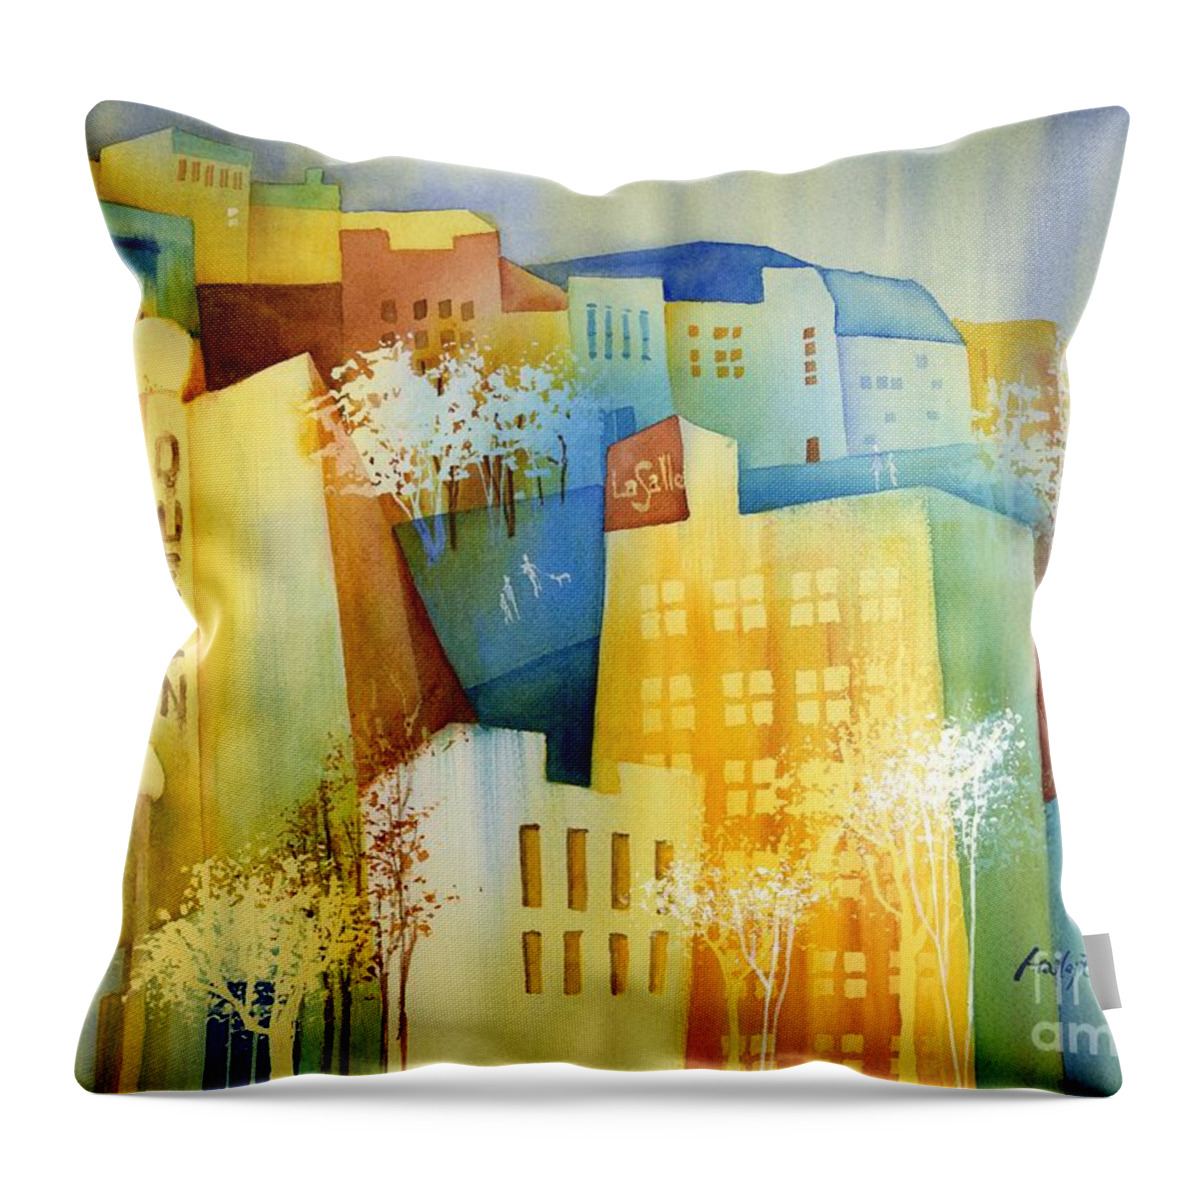 Contemporary Throw Pillow featuring the painting Queen and La Salle by Hailey E Herrera